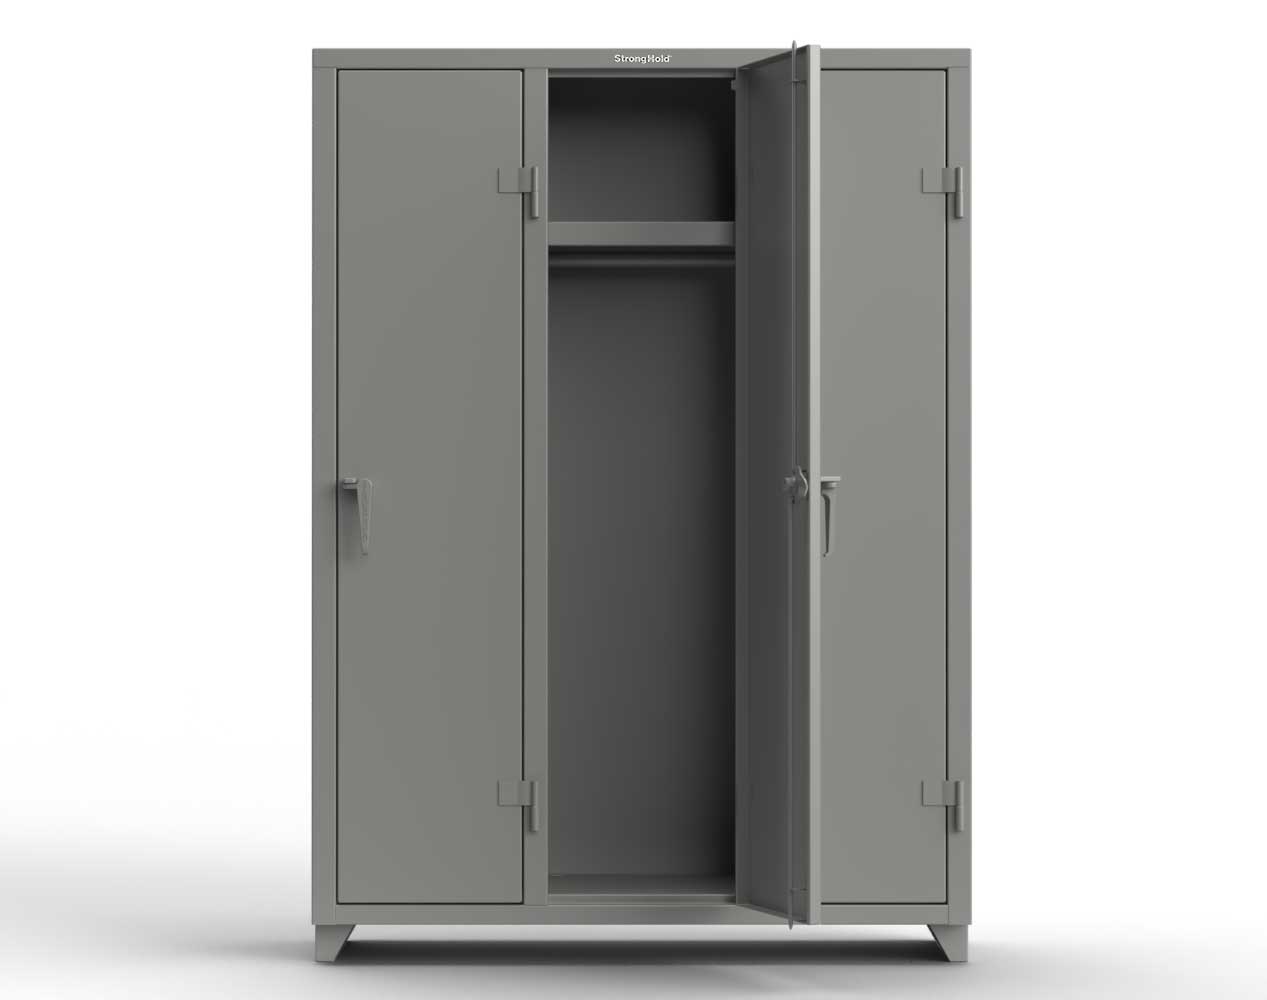 Extra Heavy Duty 14 GA Single-Tier Locker with Shelf and Hanger Rod, 3 Compartments - 54 in. W x 18 in. D x 75 in. H